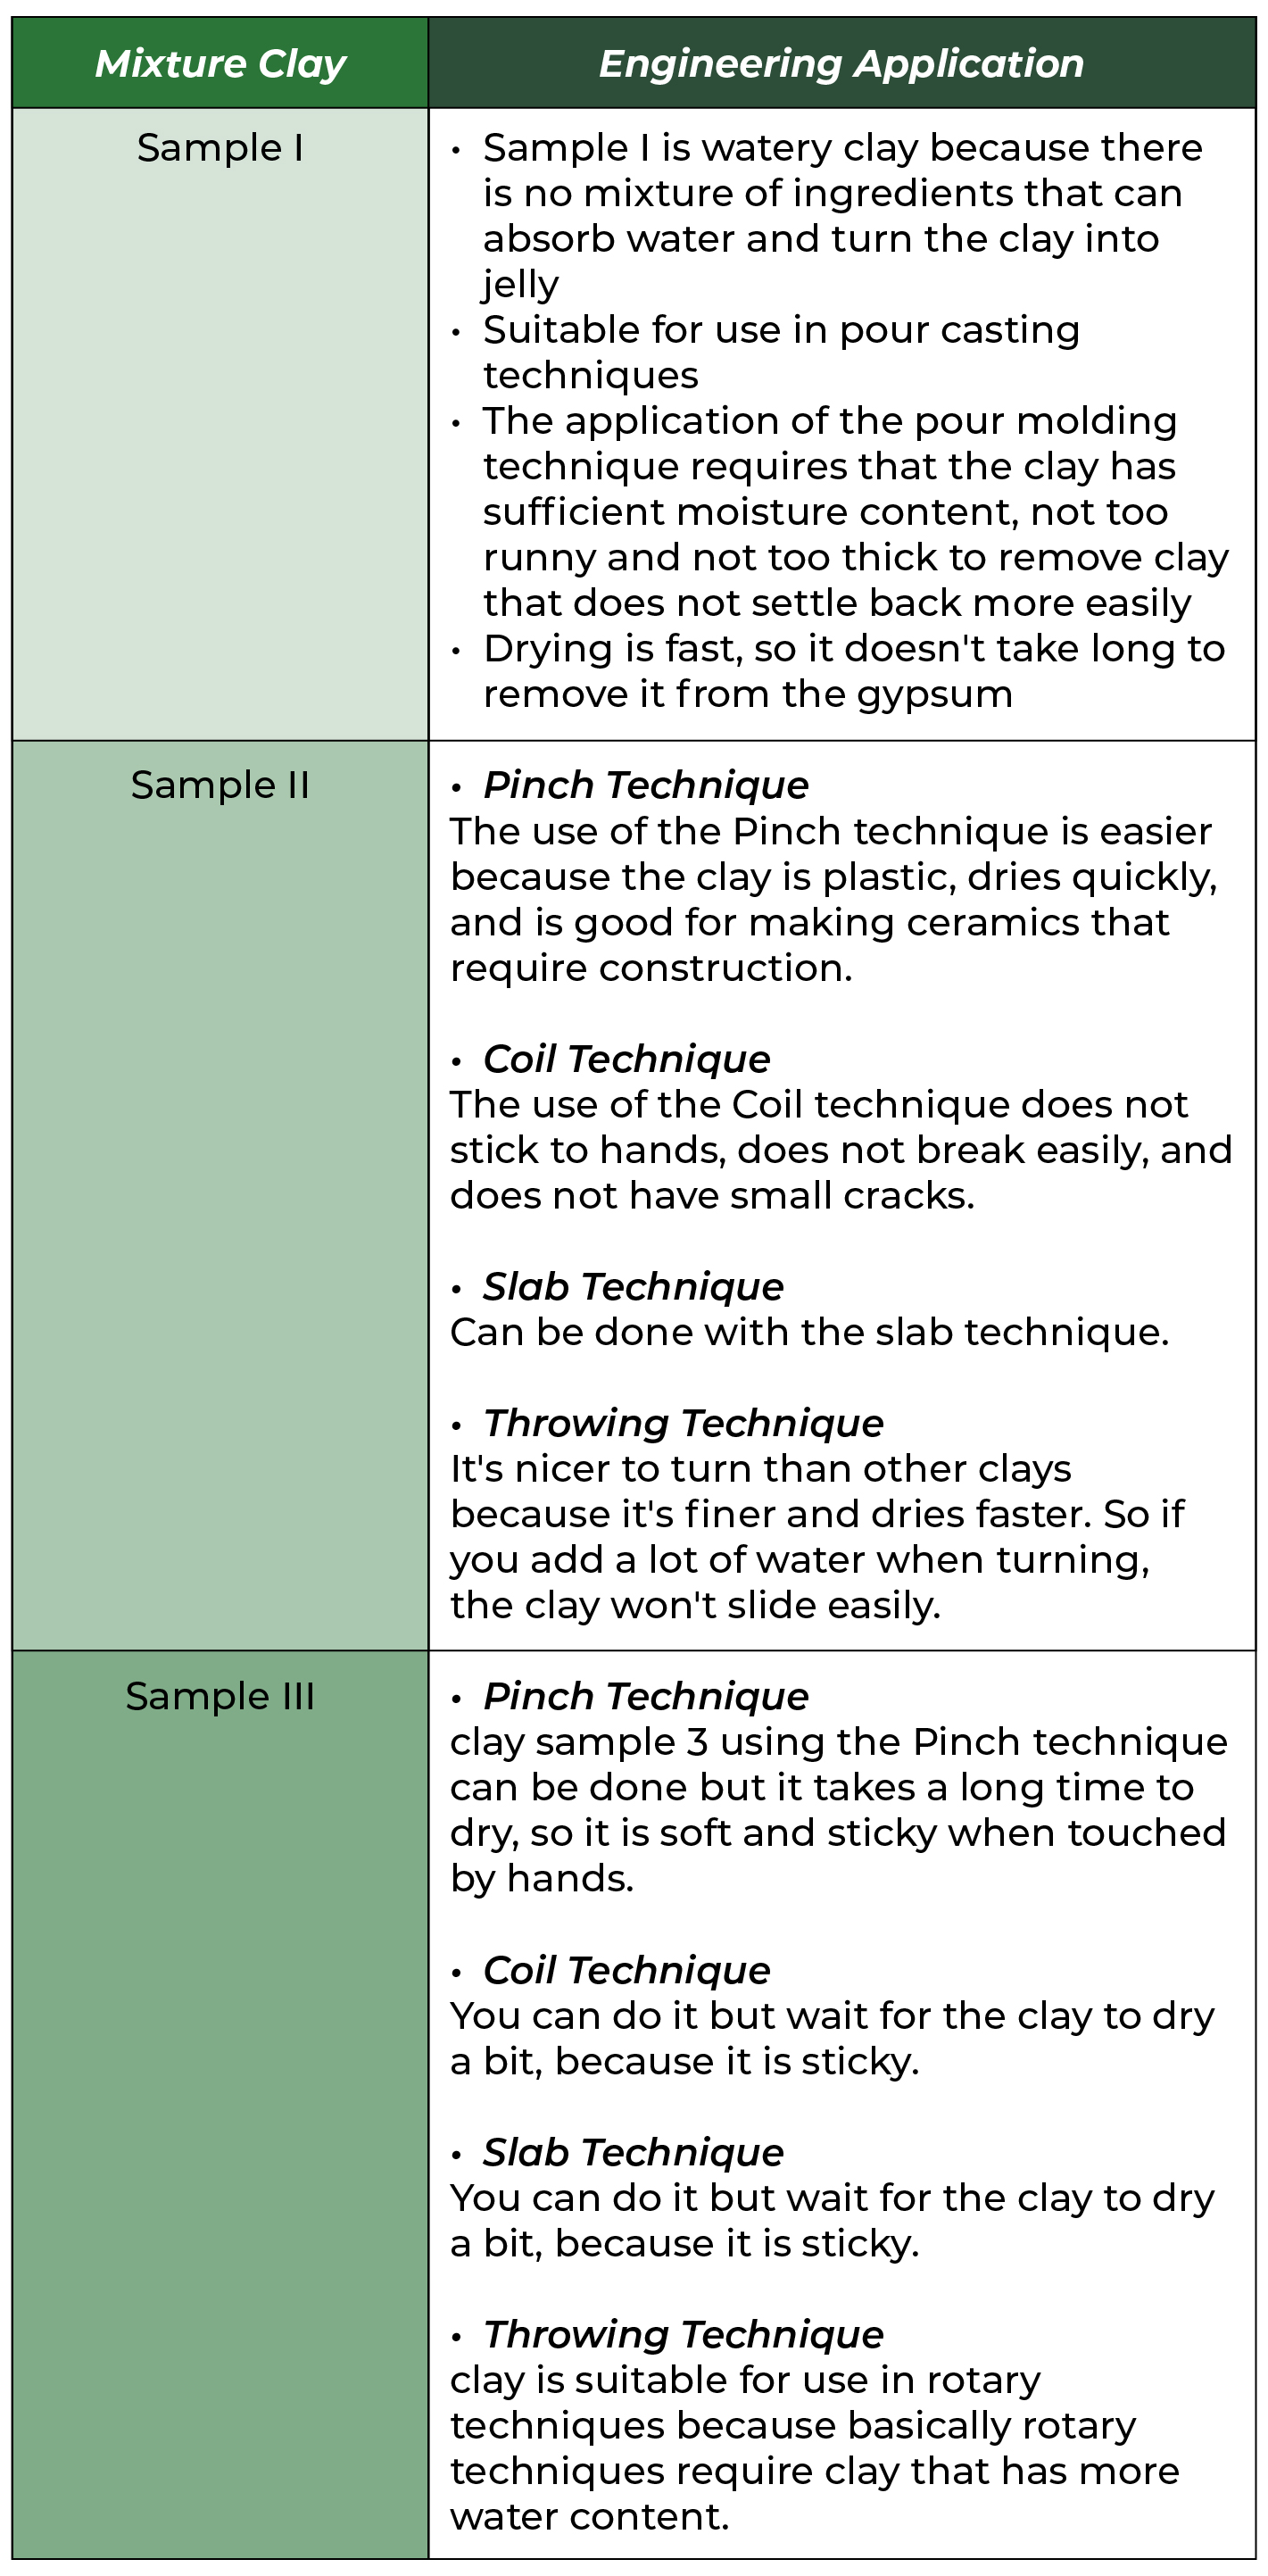 Table 4. Application of the technique to each sample